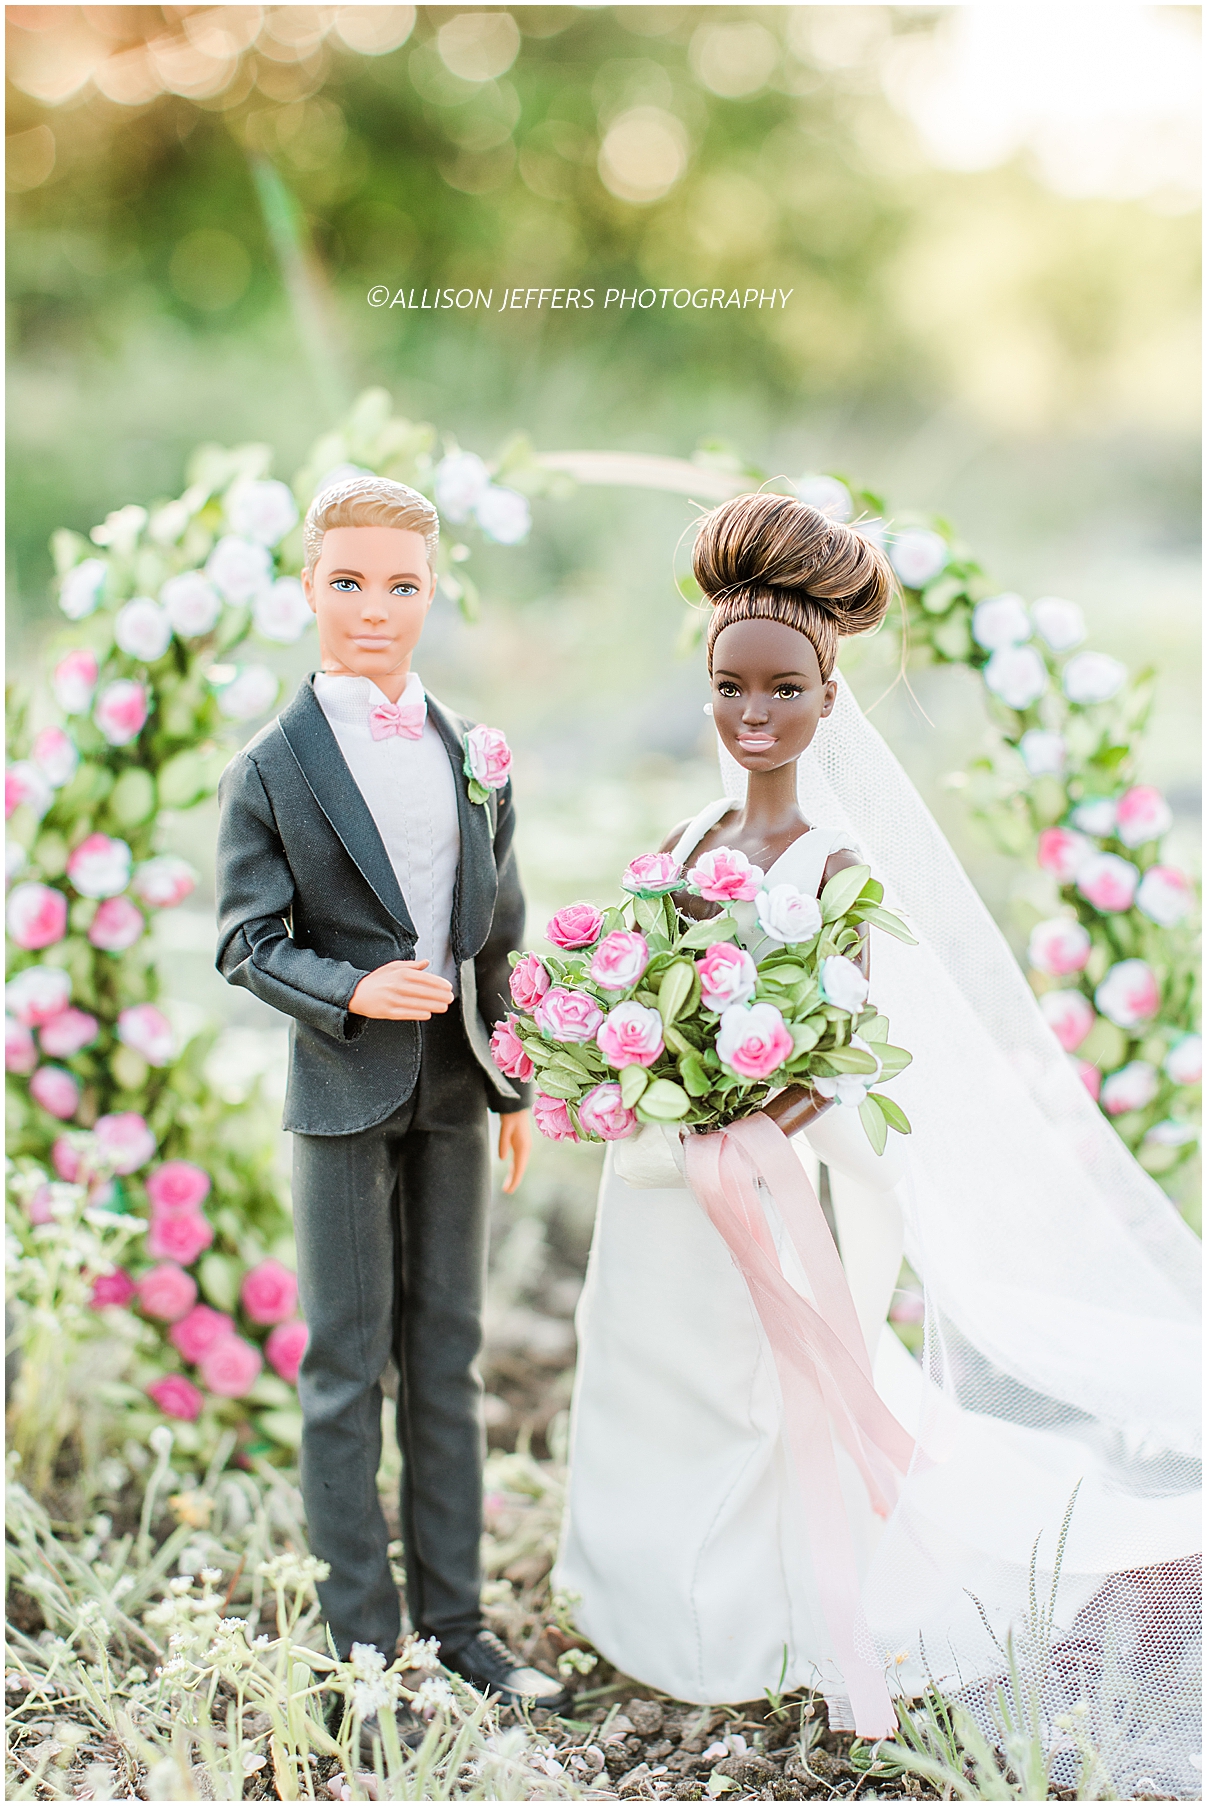 Barbie and Ken dream wedding photography styled shoot by Allison Jeffers Photography 0067